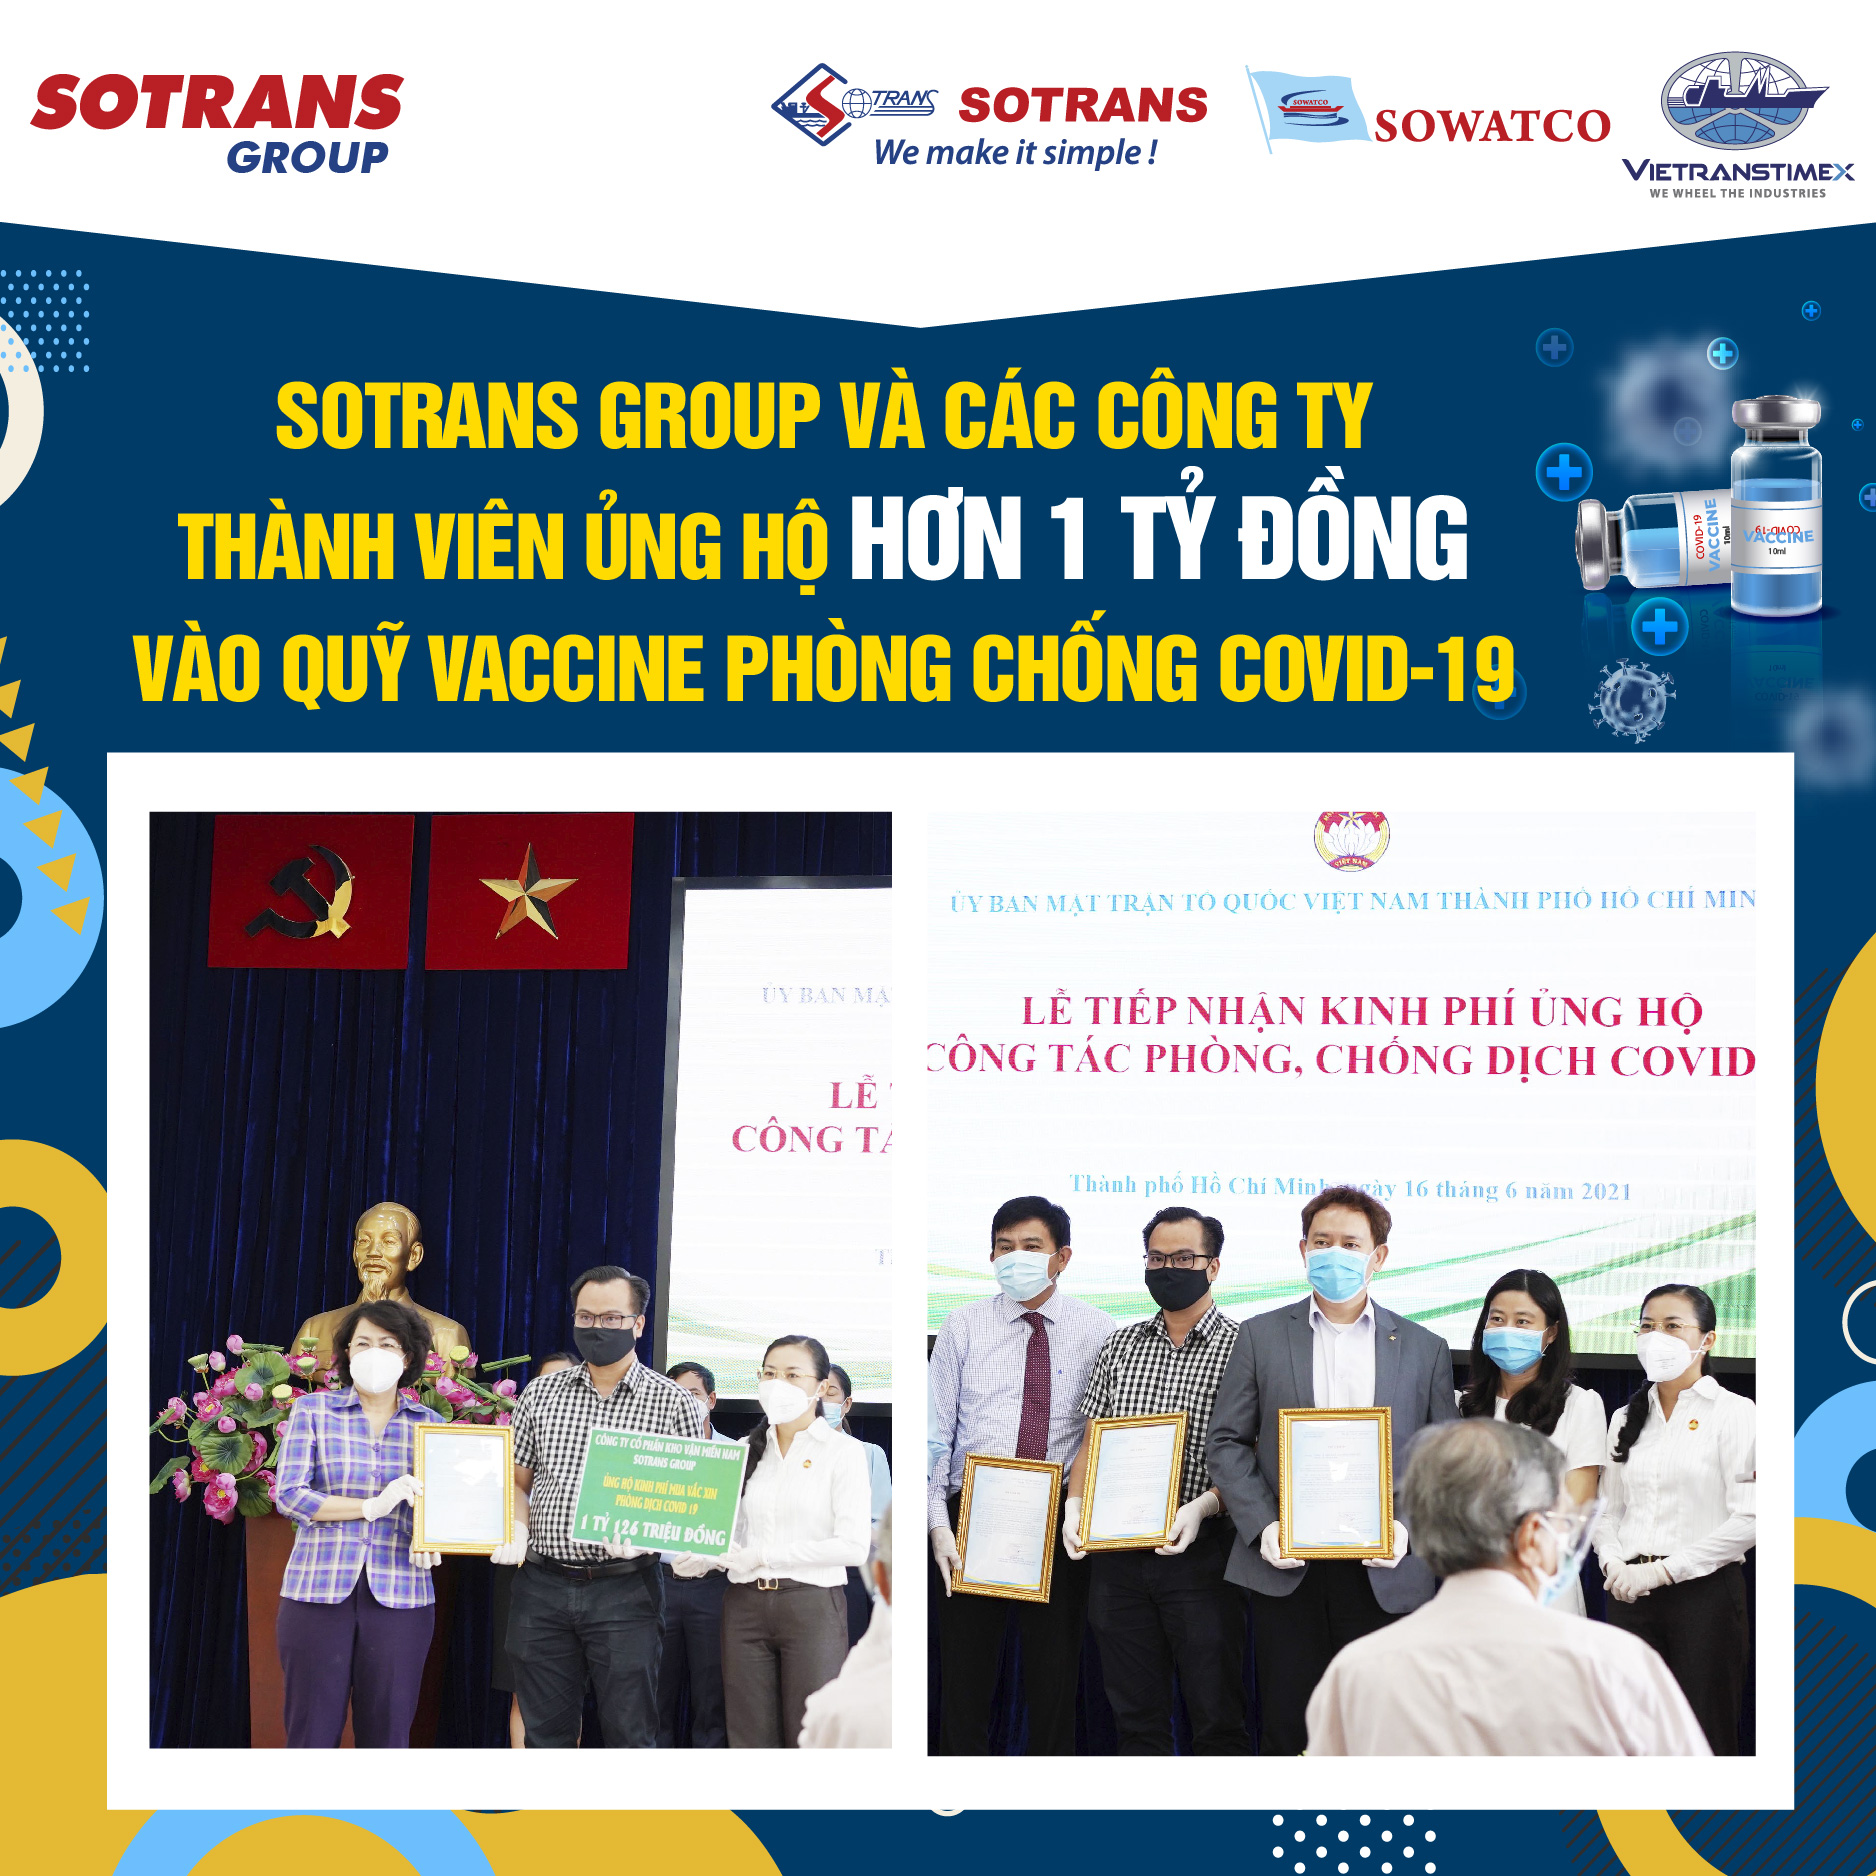 Sotrans Group And Member Companies Donate More Than 1 Billion Vnd To Covid-19 Vaccine Fund